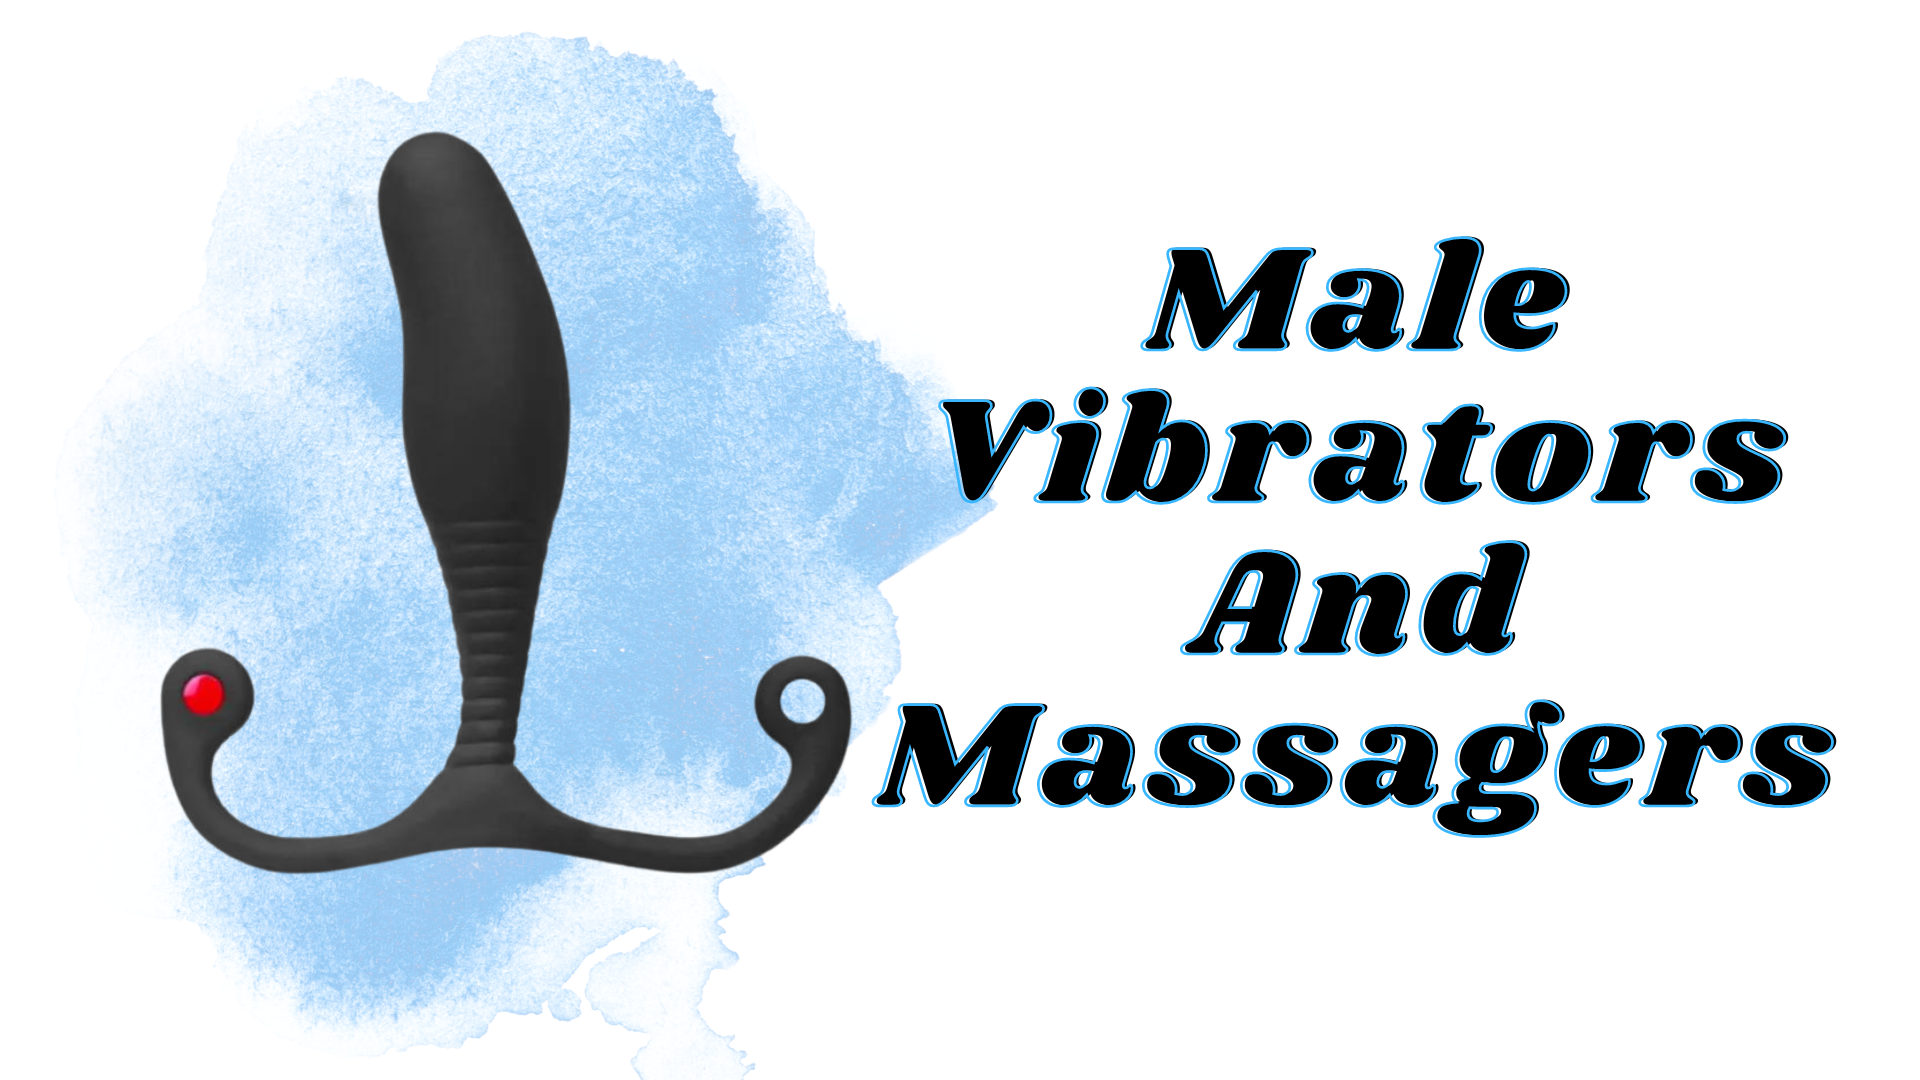 A Vibrator with words Male Vibrators And Massagers